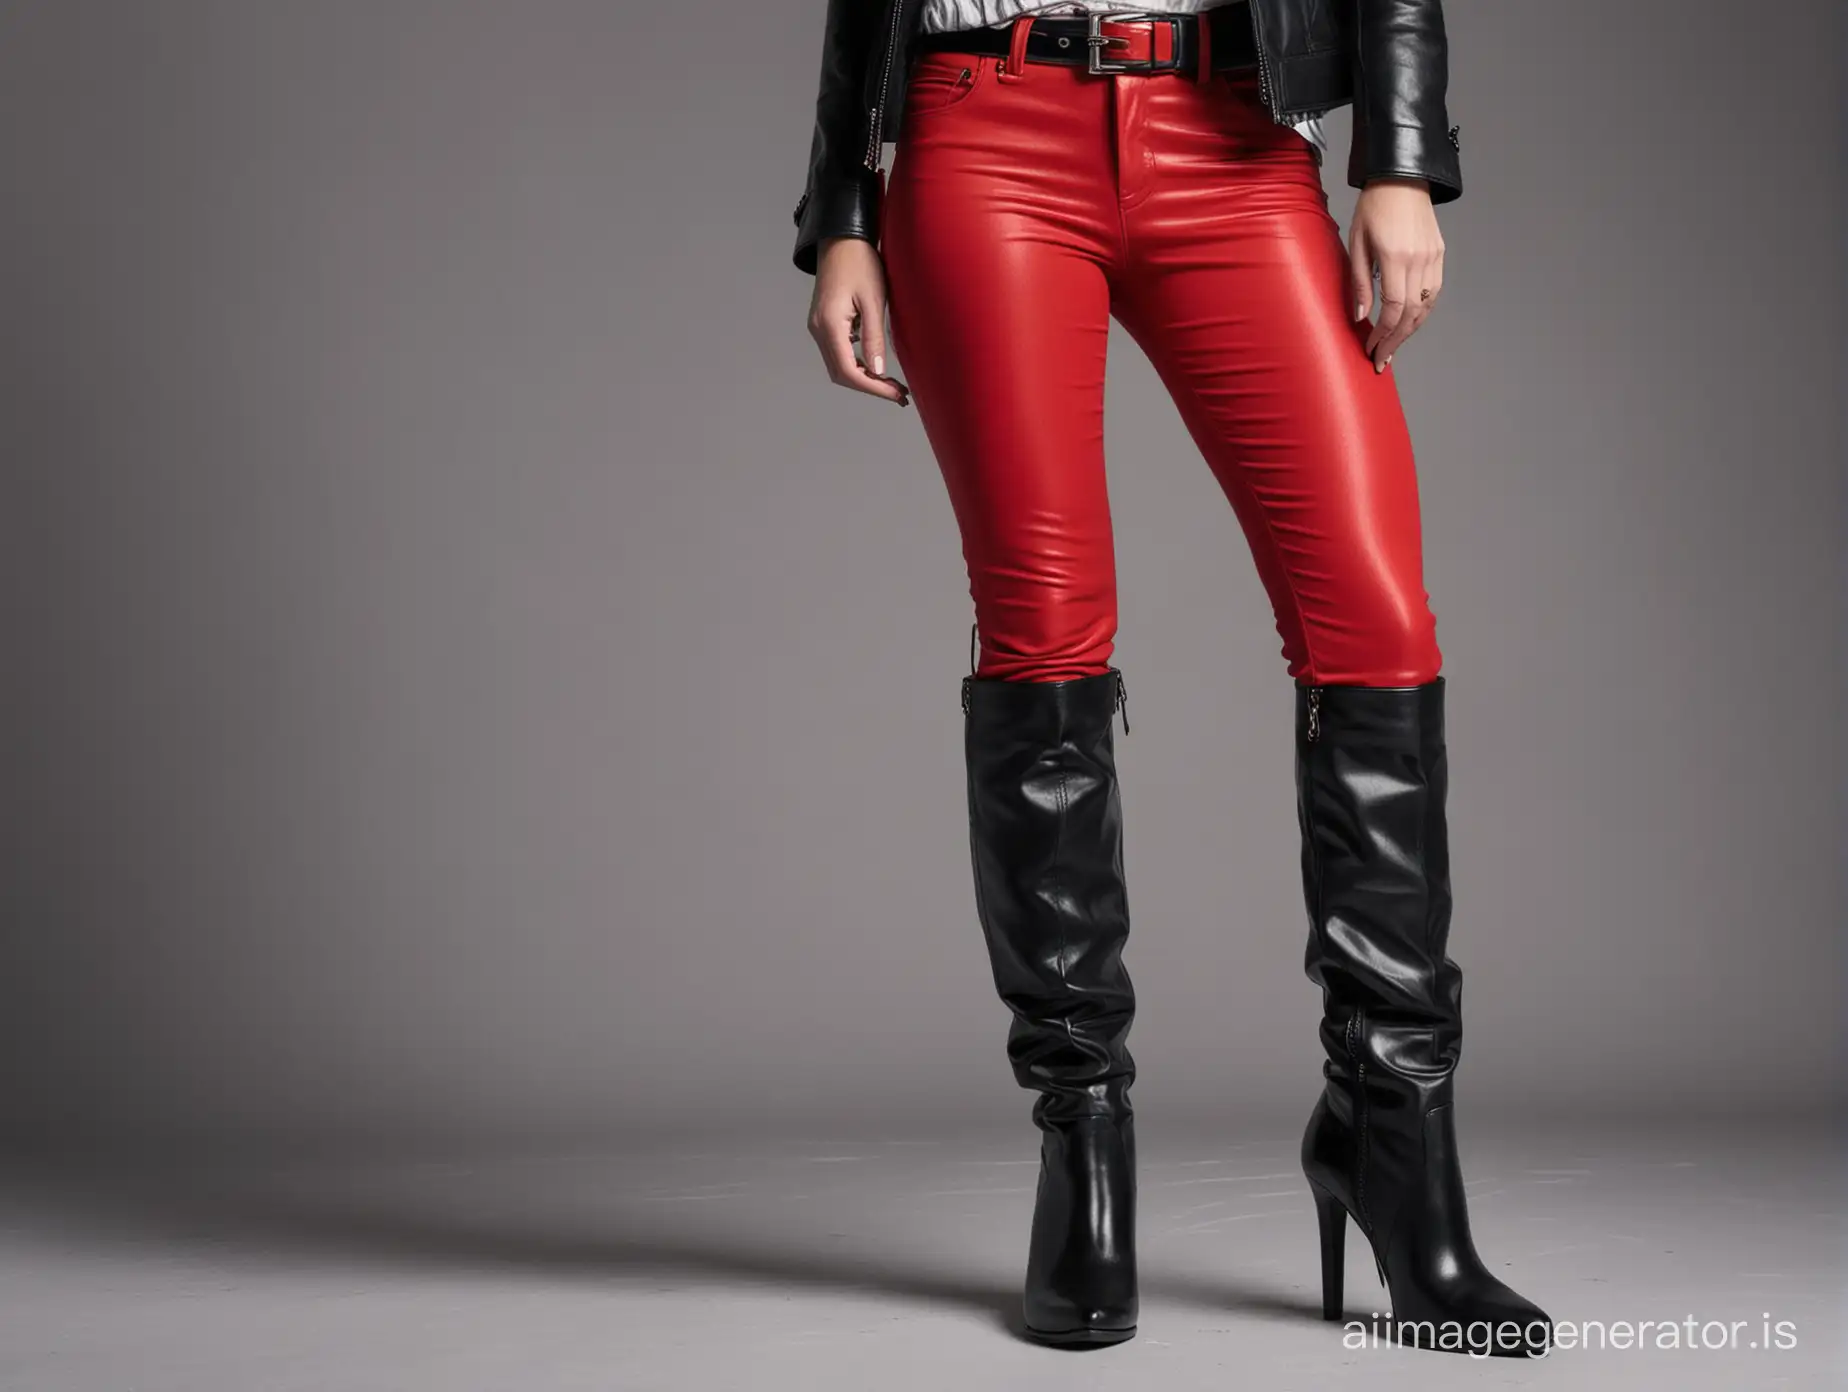 closeup on a lady in red textile pants with belt, tight black knee high boots, standing tall, open black leather jacket